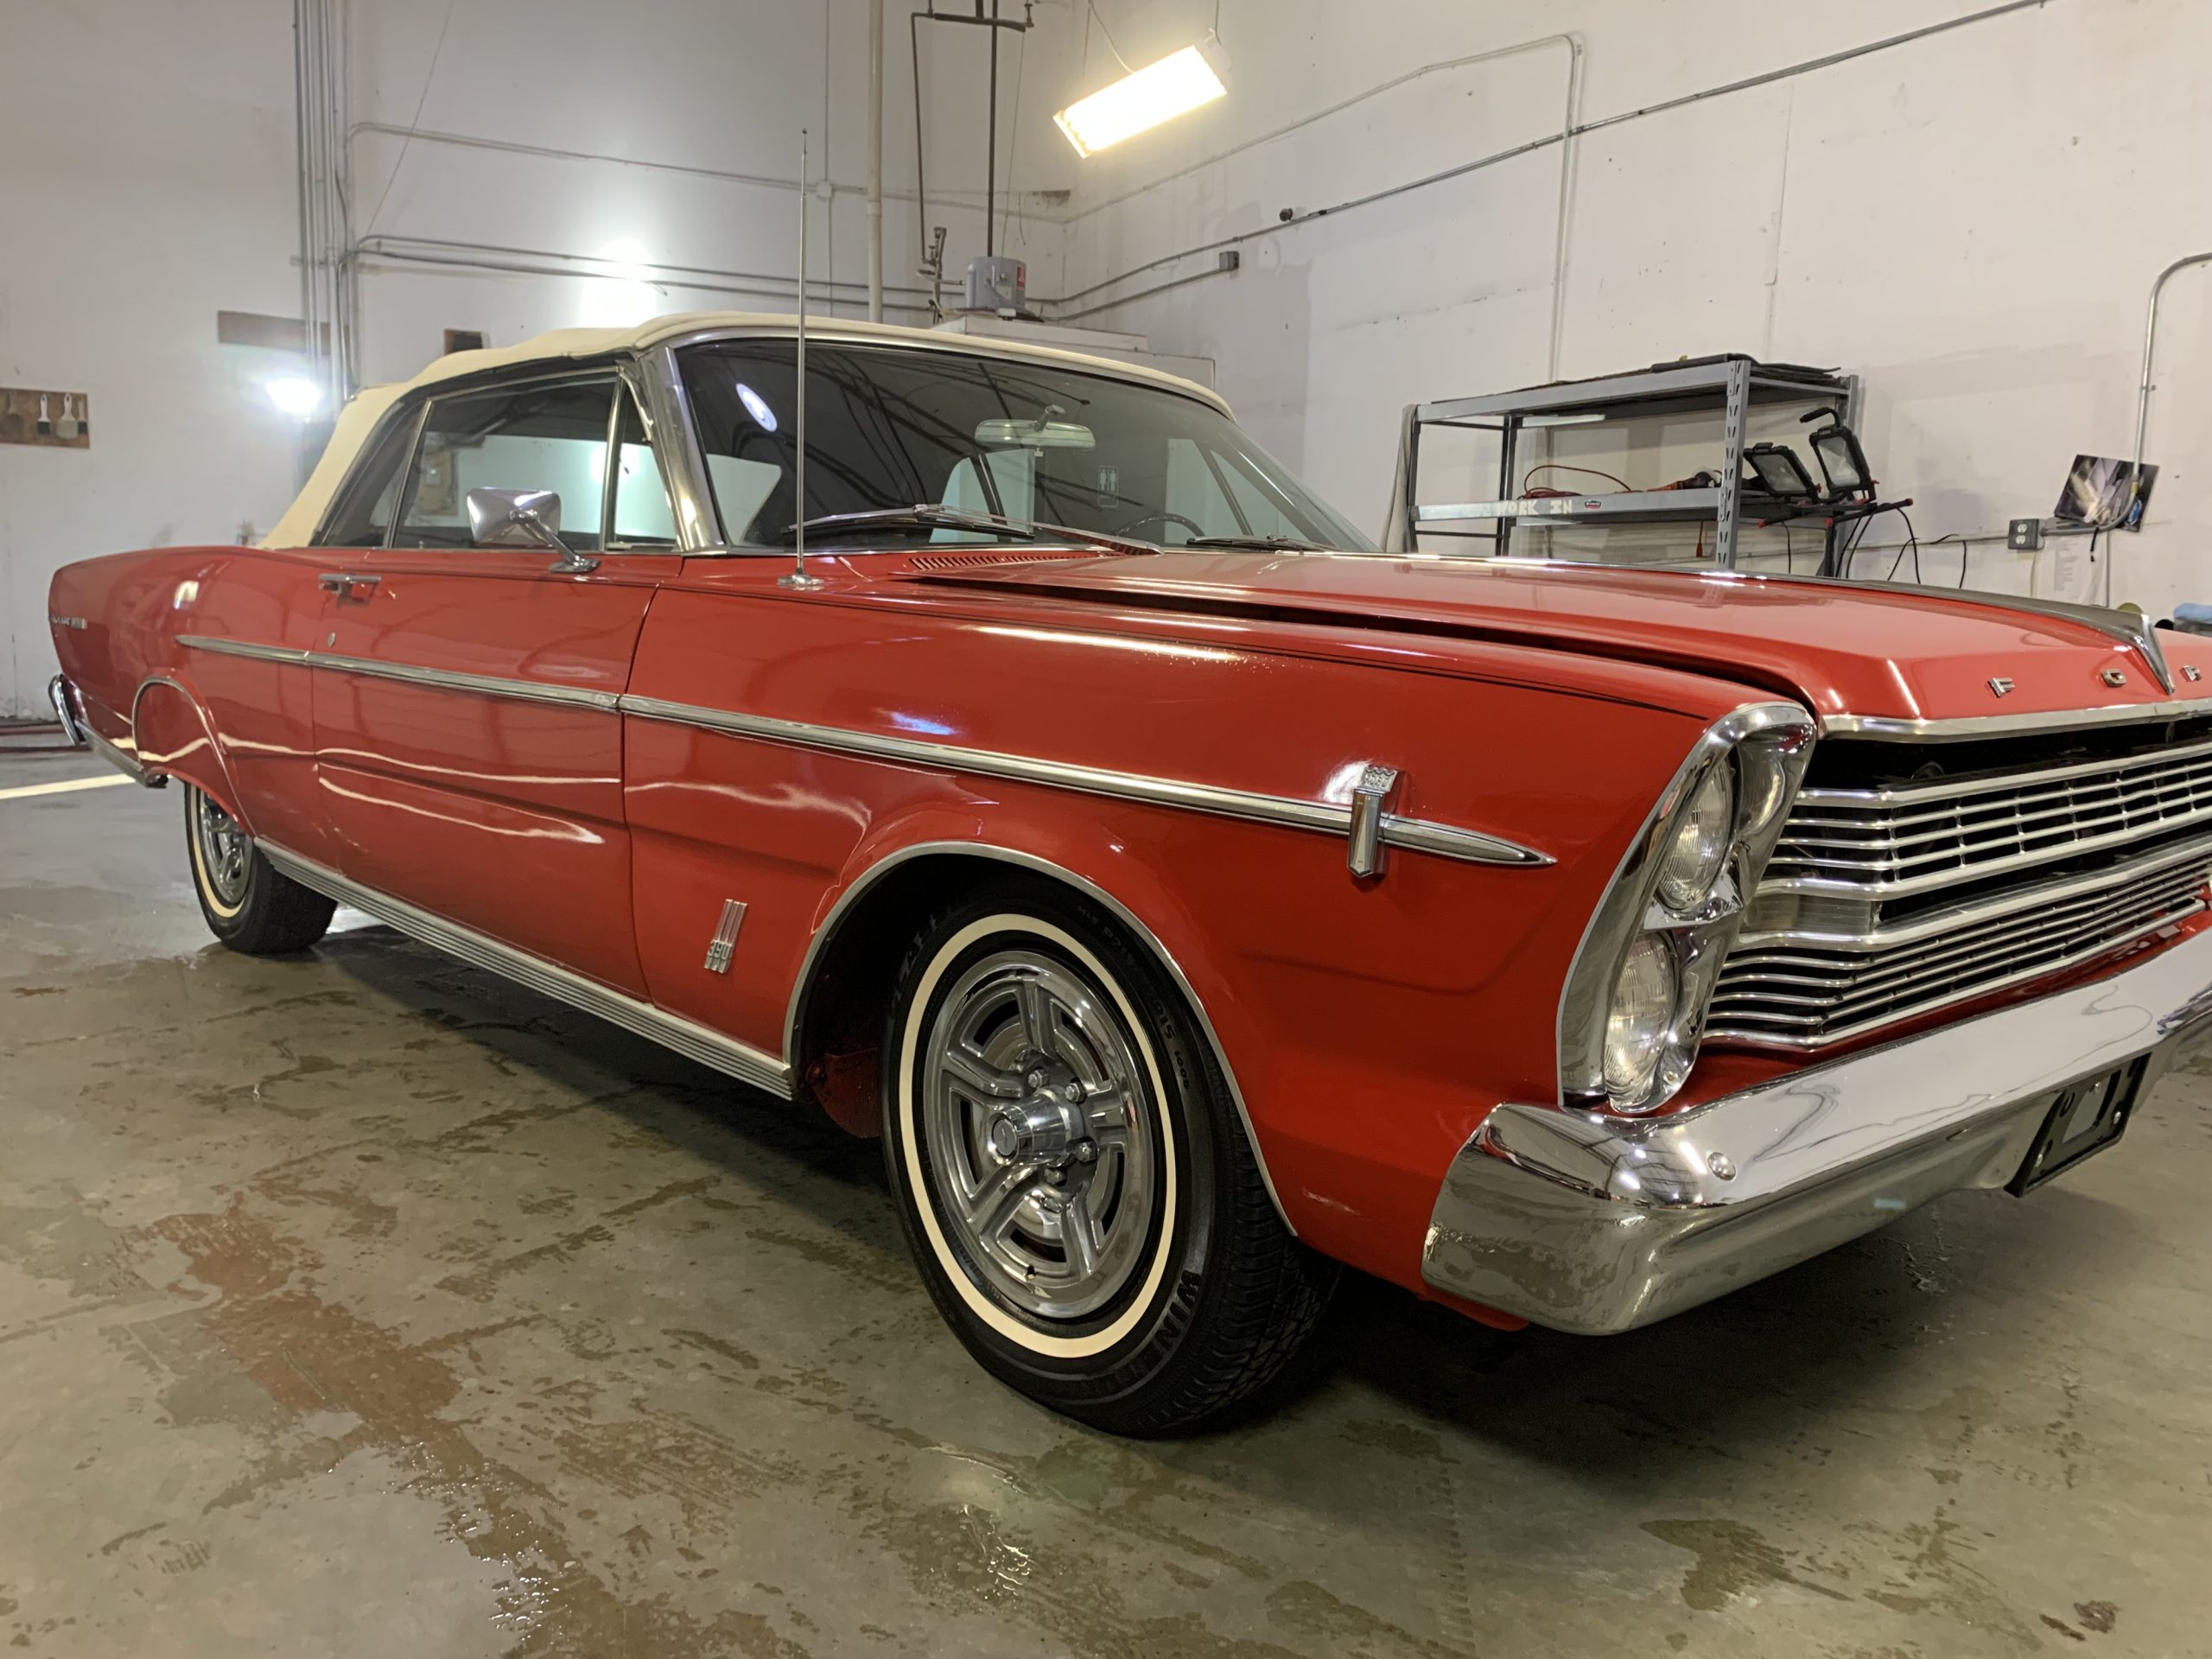 1966 Ford Galaxie 500 Convertible For Sale